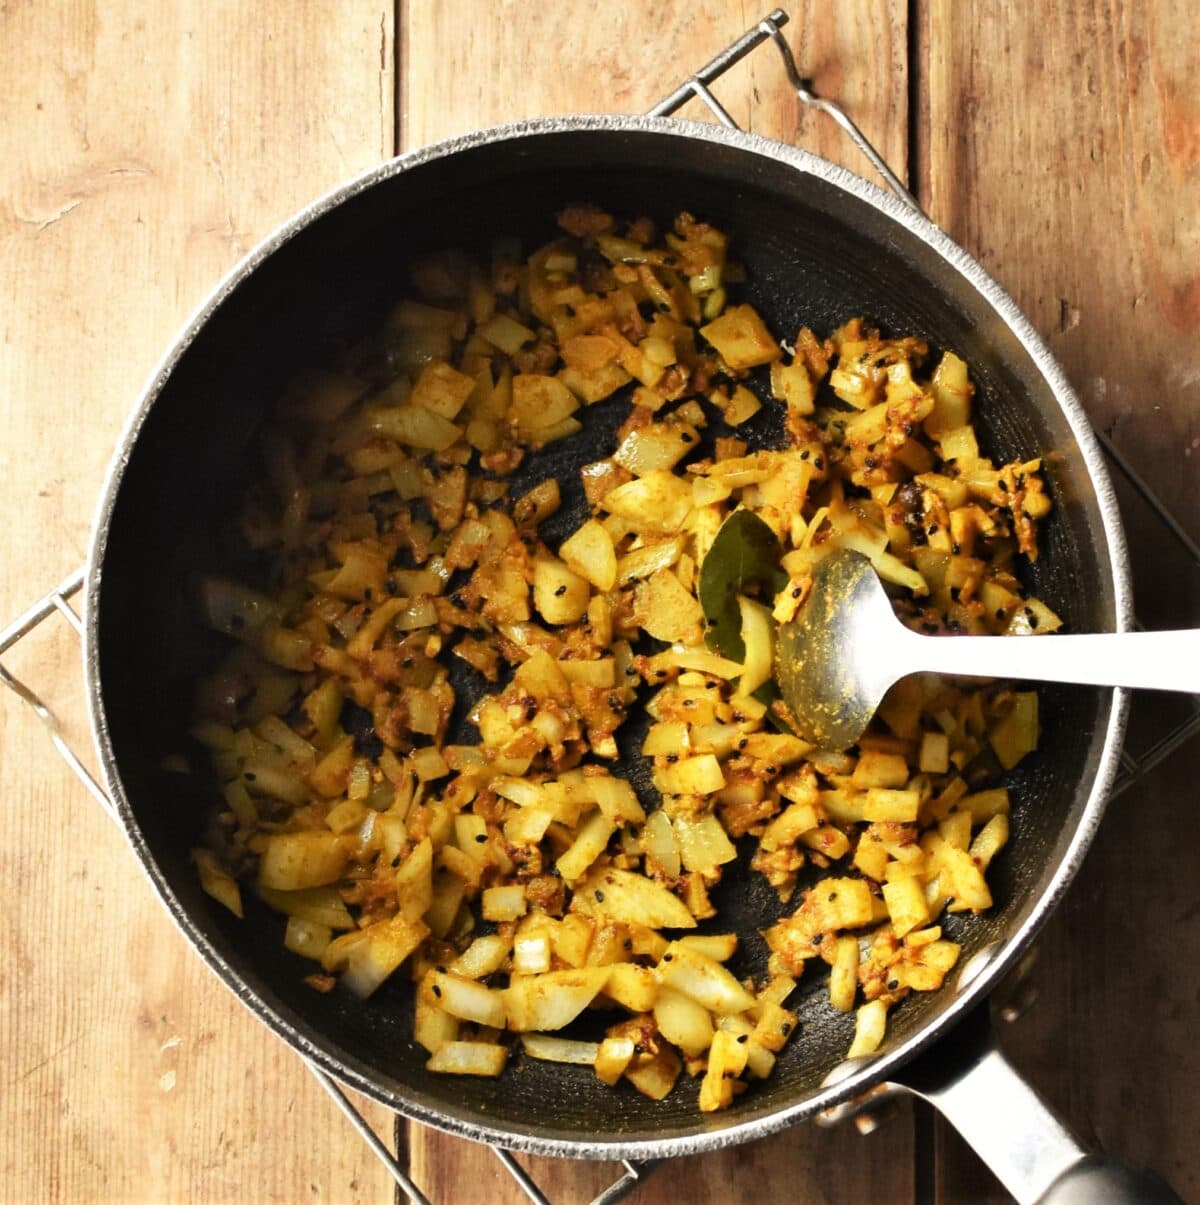 Chopped onions and spices in large pot with spoon.